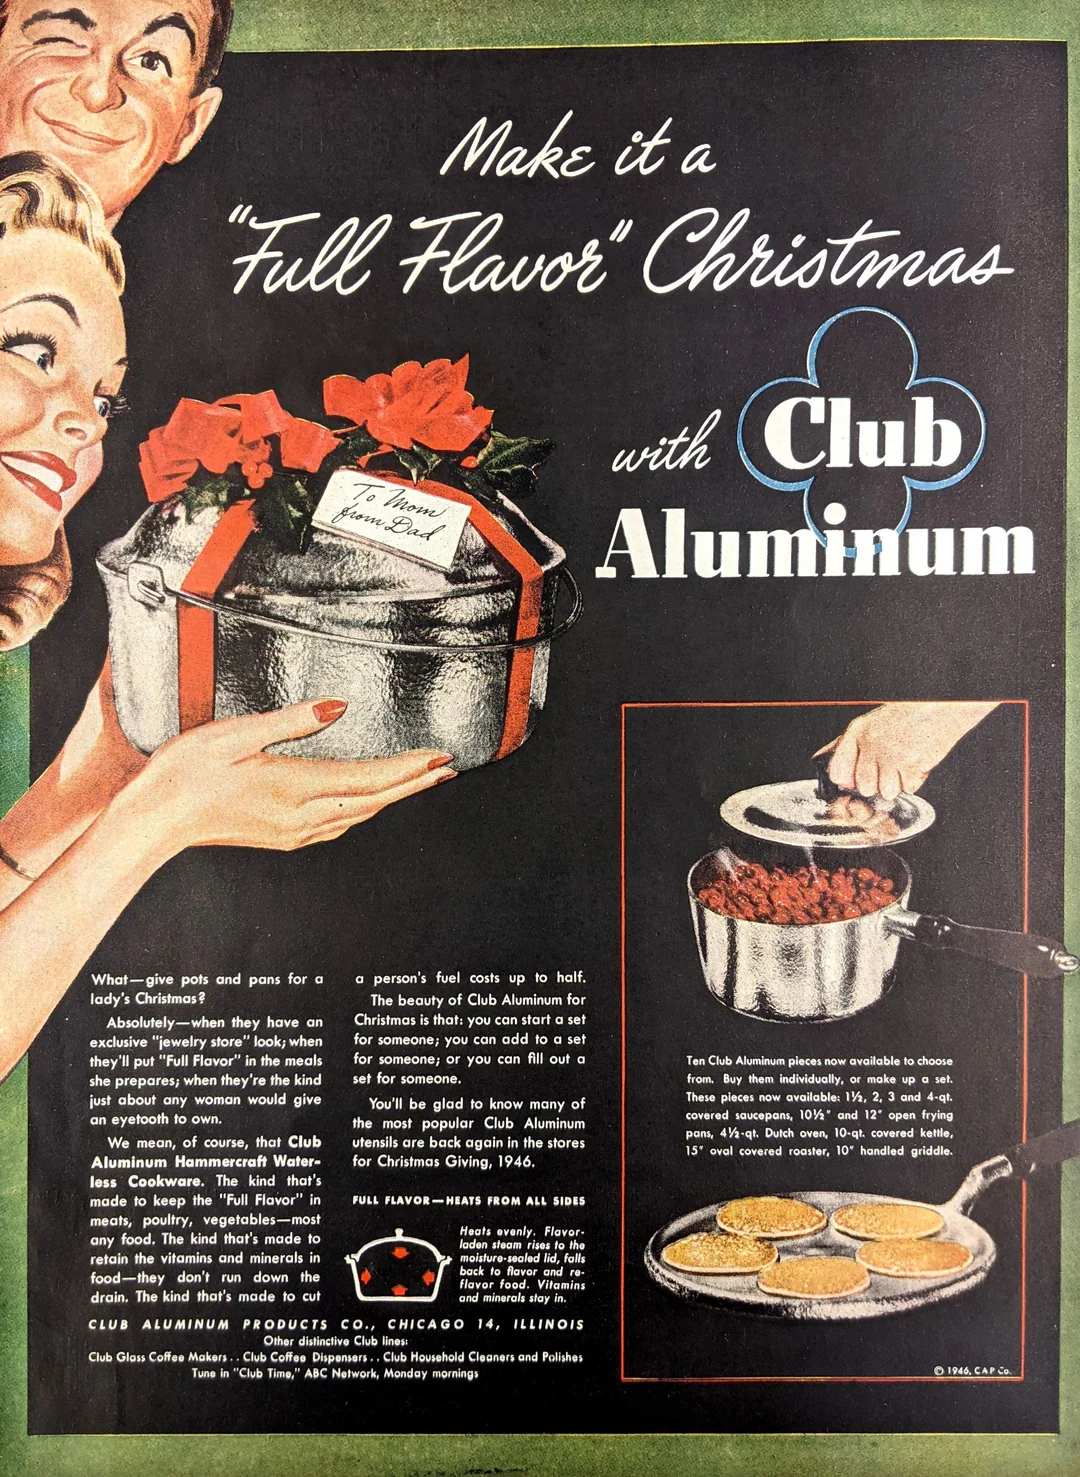 MakE it a "Hull Flavor" Christmas To Thome from Dad with Club Aluminum